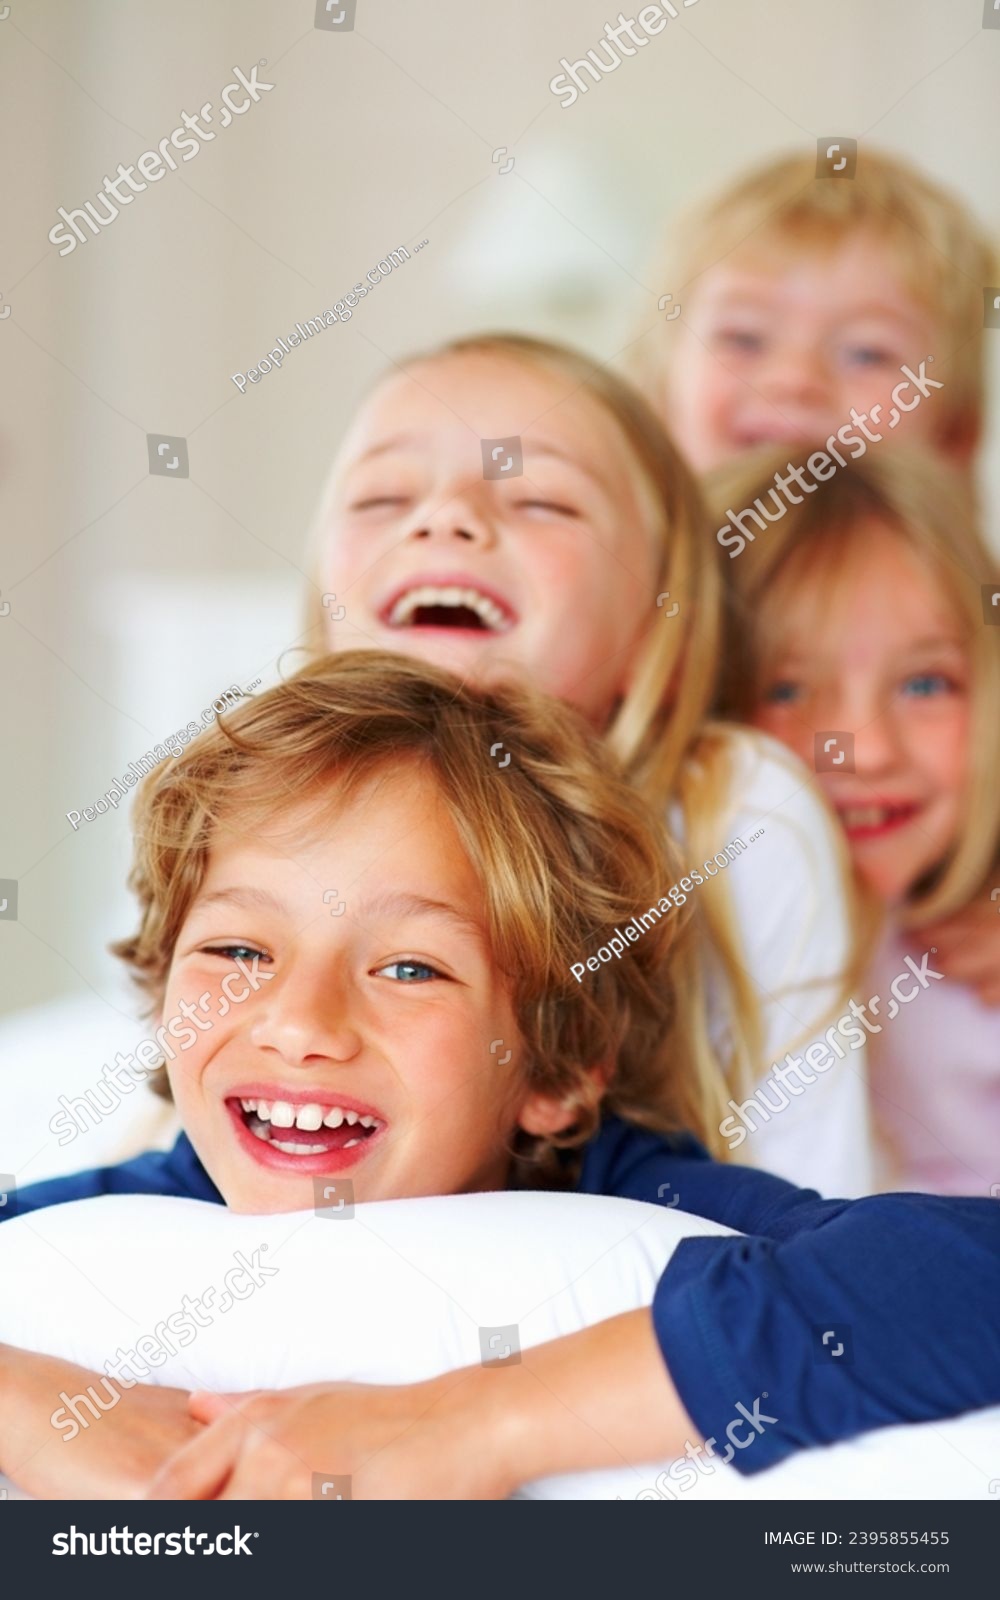 Portrait, love or laughing with brother and sister sibling children on a bed in the home together. Family, happy or bonding with funny boy and girl kids in the bedroom of an apartment on the weekend #2395855455